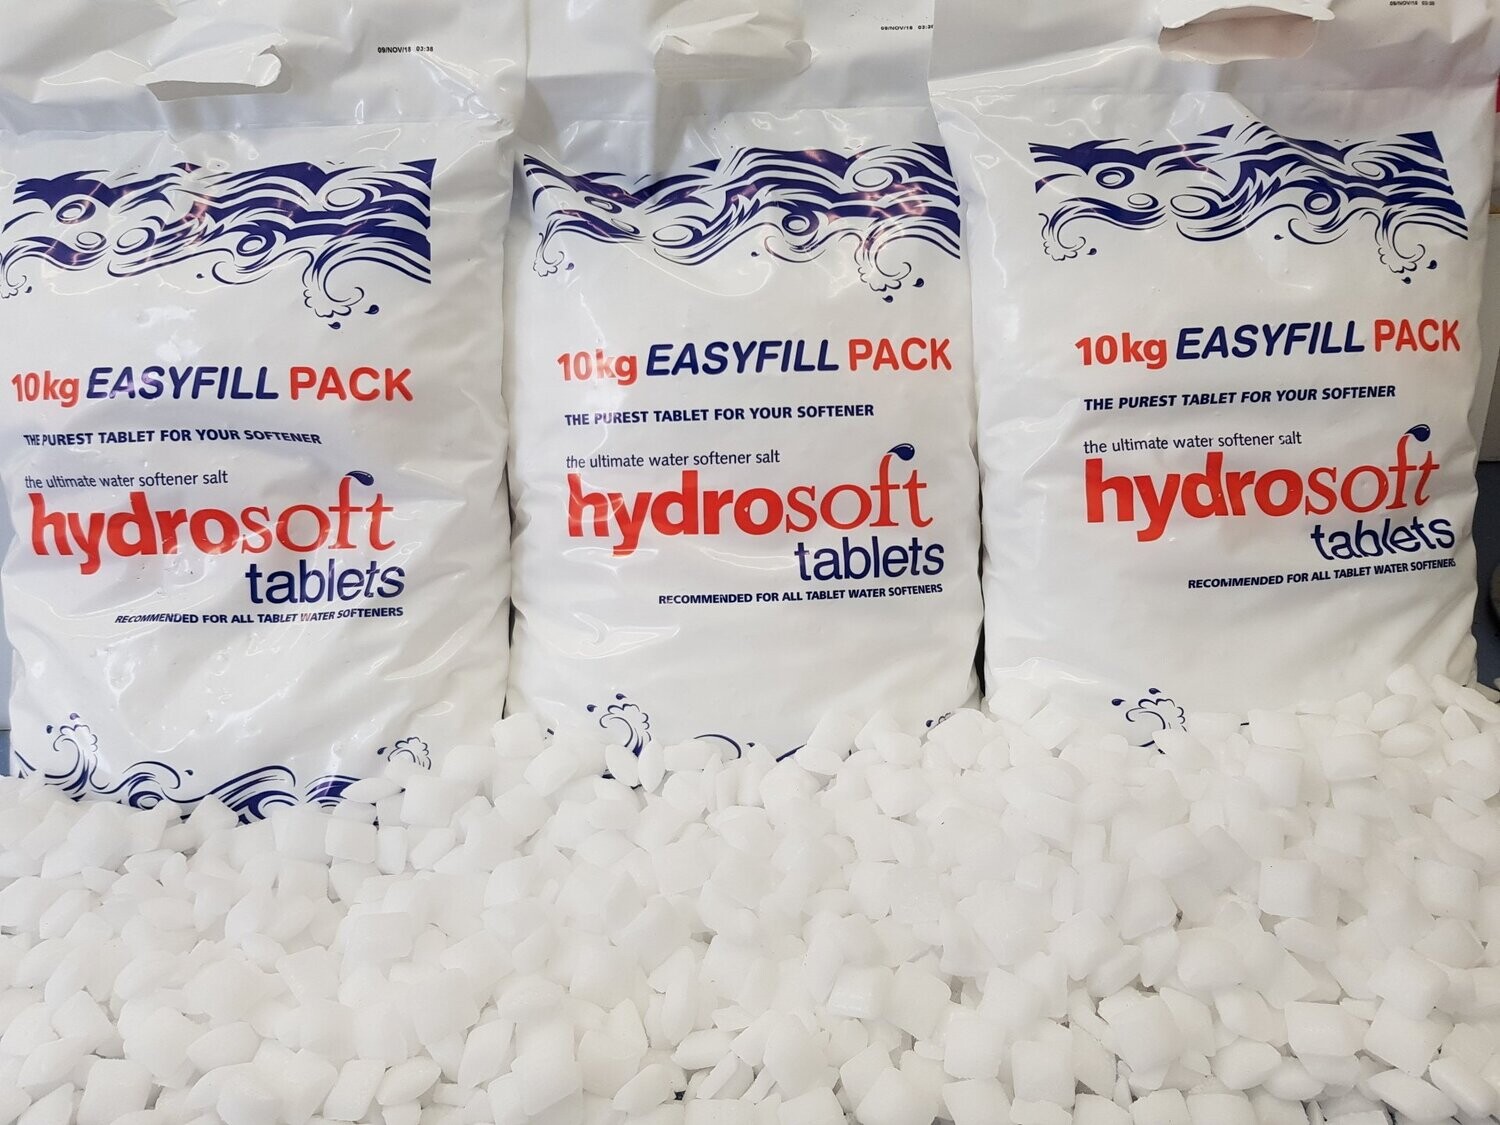 1 - 5 Bags x 10kg Hydrosoft Easyfill Tablet Salt - £8.00 per bag collected  - From